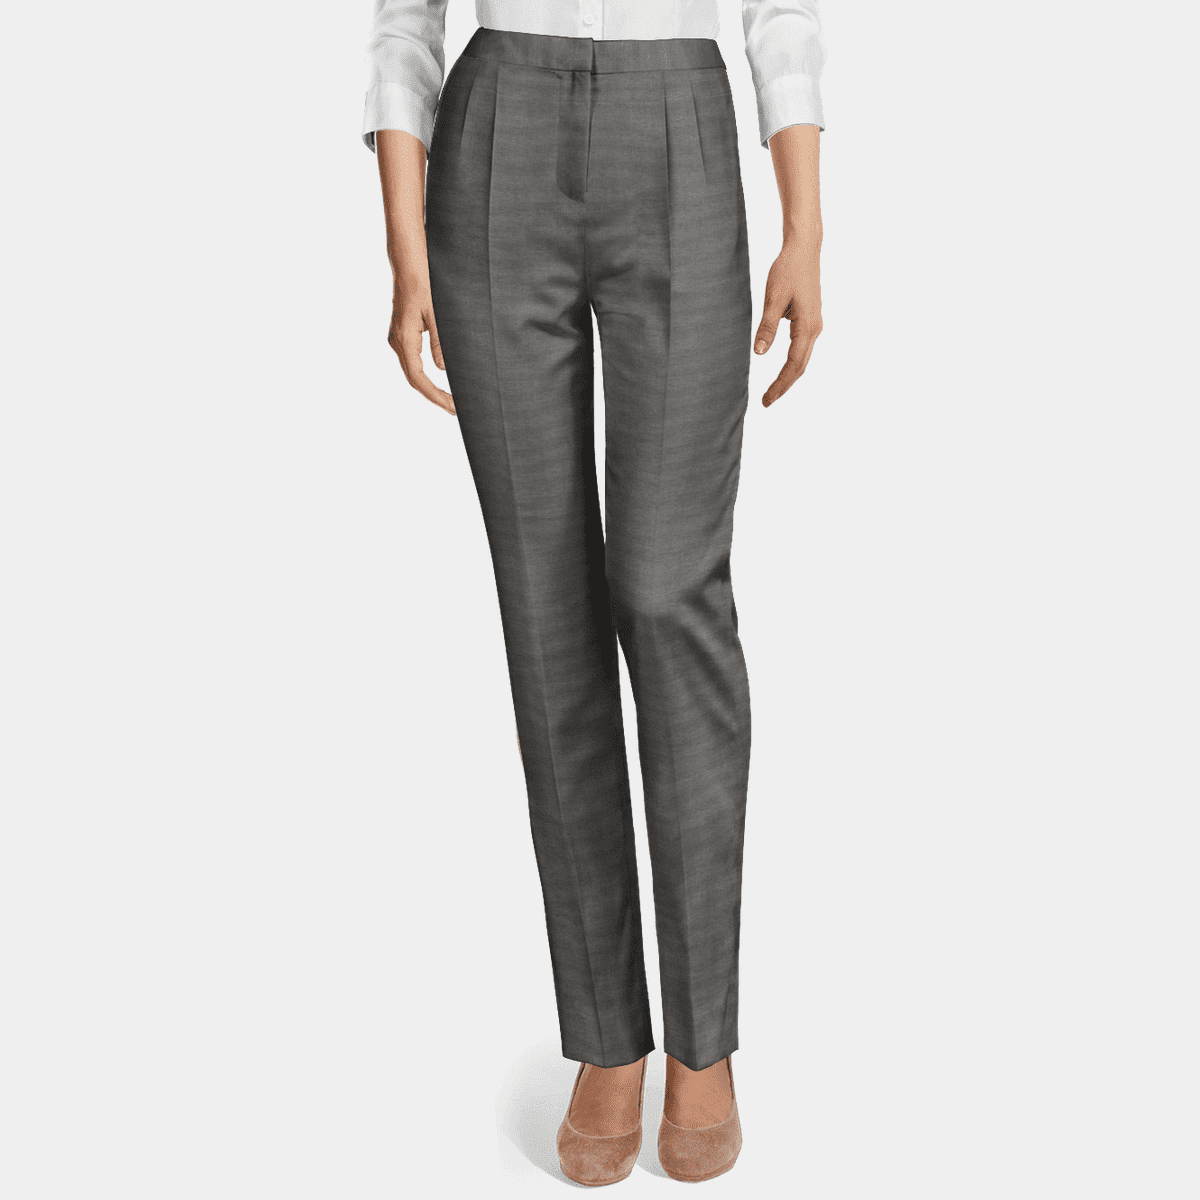 Buy 80s Suit Pants Women High Waist 30 Women's Suit Trousers Medium Grey High  Waisted Tapered Leg Trousers 30 Gray Cigarette Pants Women Size M Online in  India 